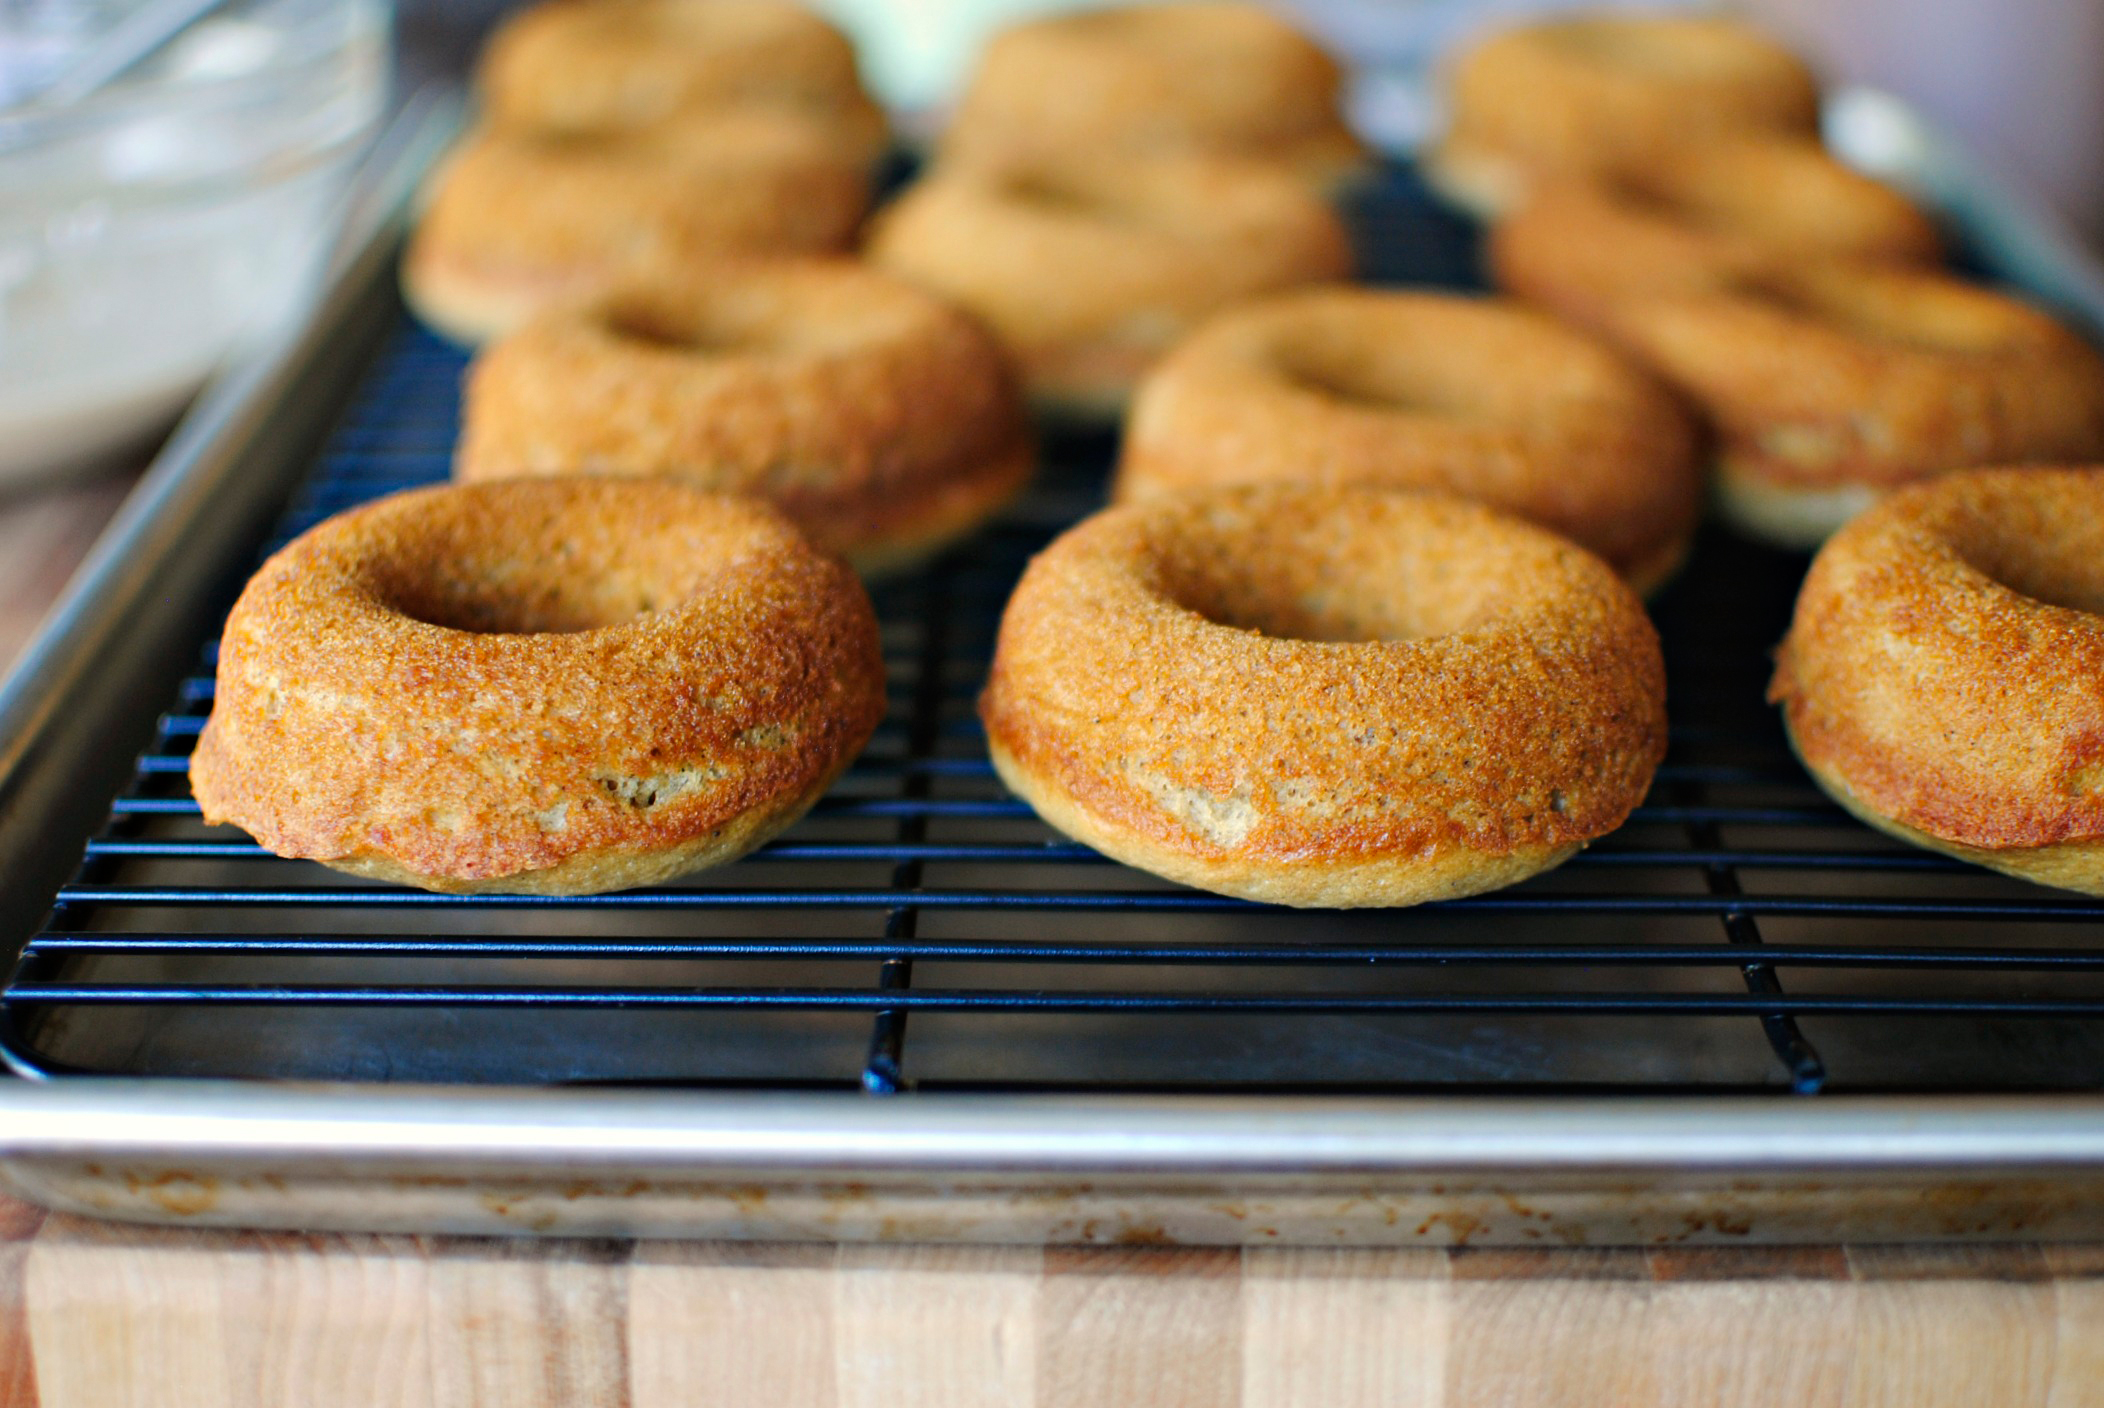 Tasty Kitchen Blog: Apple Cider Donuts. Guest post by Laurie of Simply Scratch, recipe submitted by TK member Aimee of Shugary Sweets.